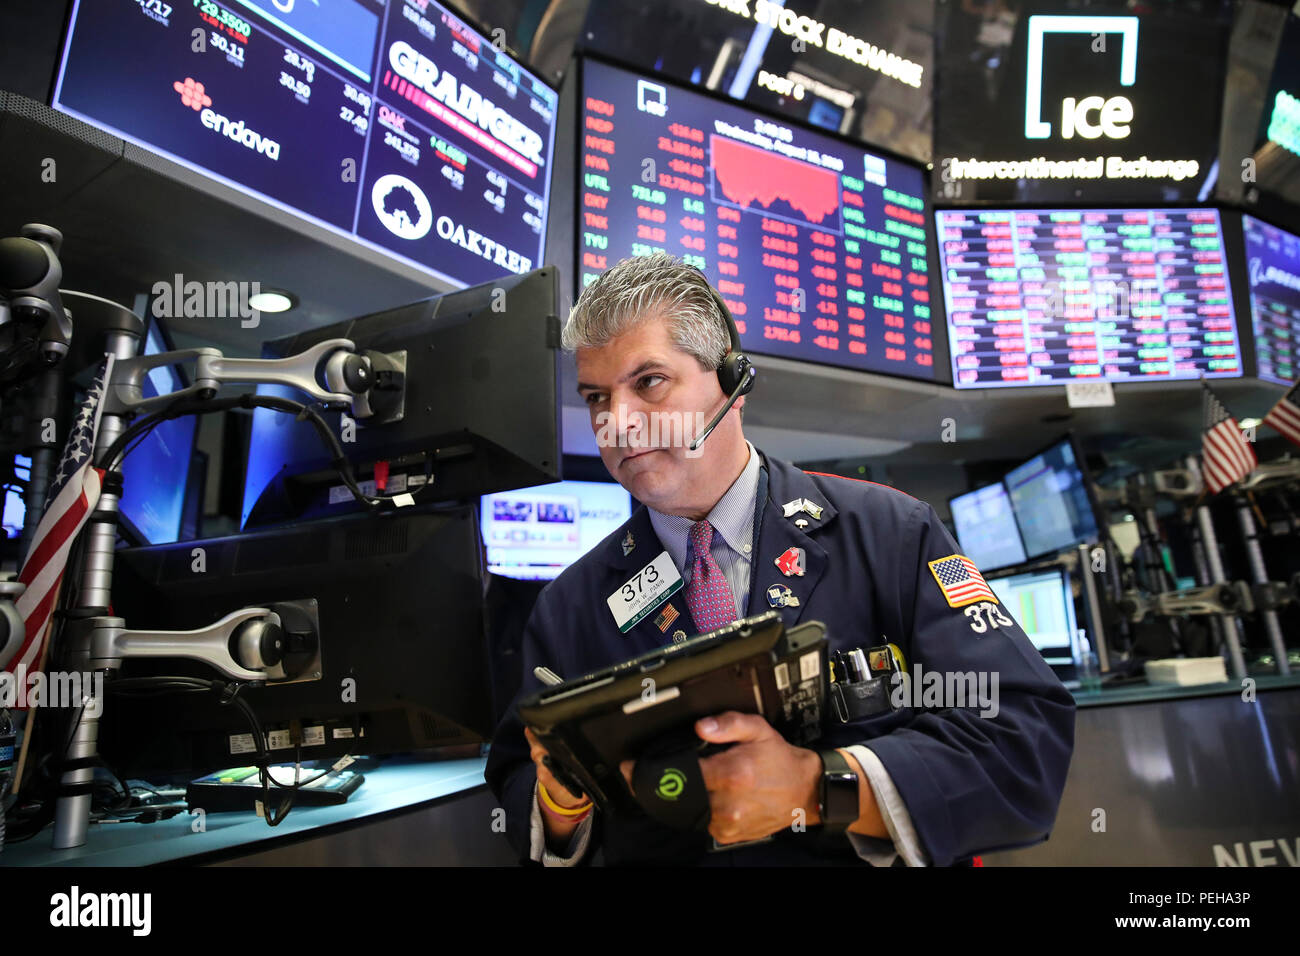 New York, USA. 15th Aug, 2018. A trader works at the New York Stock Exchange in New York, the United States, on Aug. 15, 2018. U.S. stocks closed lower on Wednesday. The Dow Jones Industrial Average fell 137.51 points, or 0.54 percent, to 25,162.41. The S&P 500 was down 21.59 points, or 0.76 percent, to 2,818.37. The Nasdaq Composite Index dropped 96.78 points, or 1.23 percent, to 7,774.12. Credit: Wang Ying/Xinhua/Alamy Live News Stock Photo